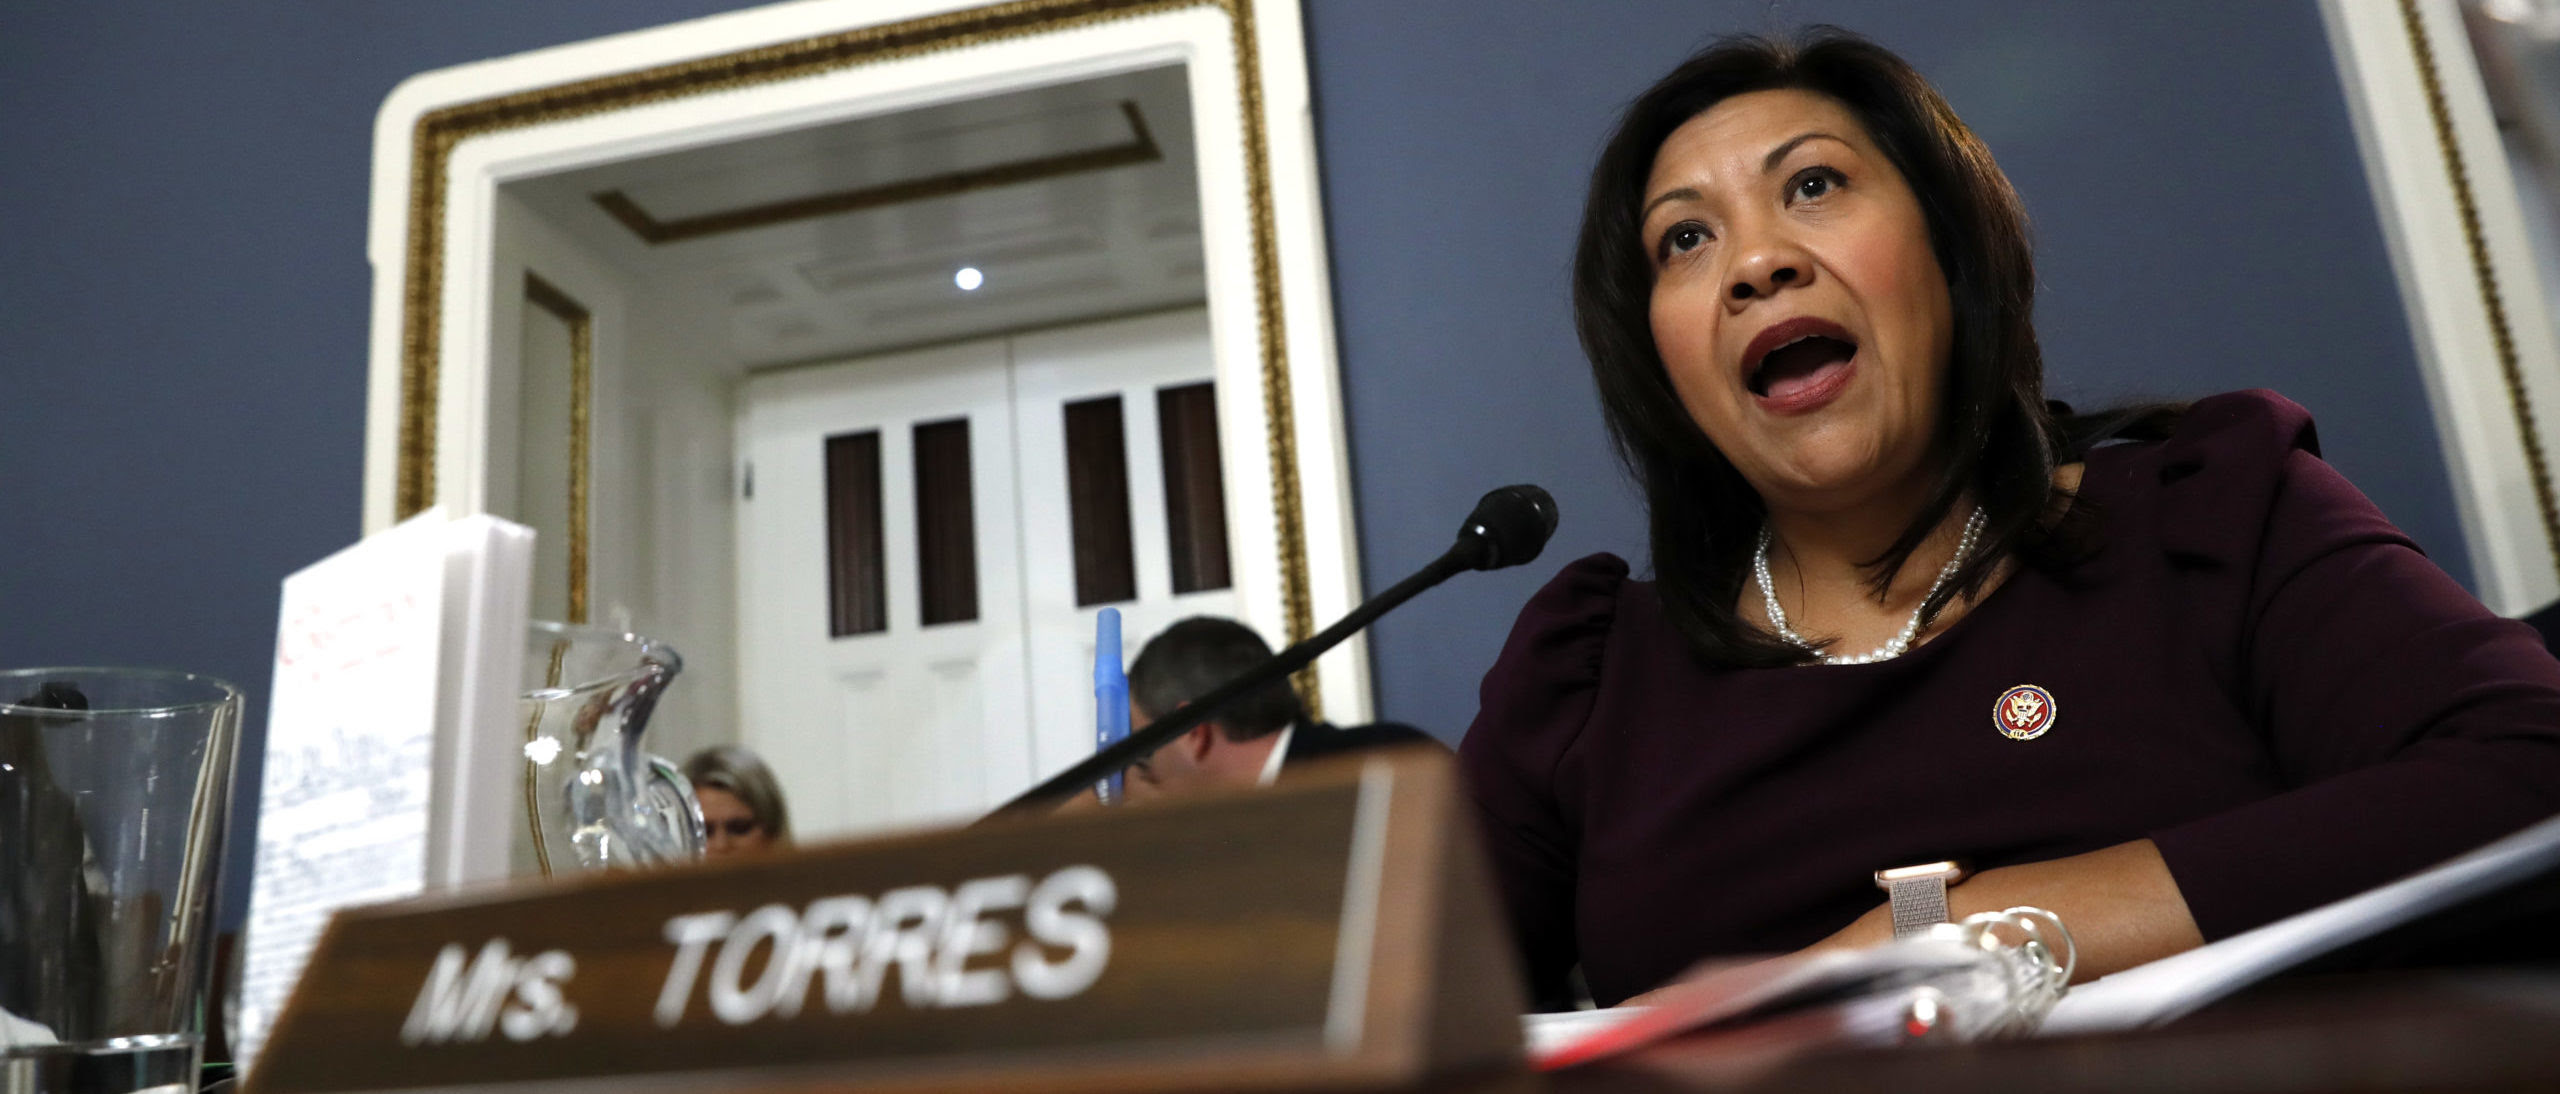 Salvadoran Government Made ‘Direct Attempts’ To Defeat Dem Rep. Torres, State Department Says